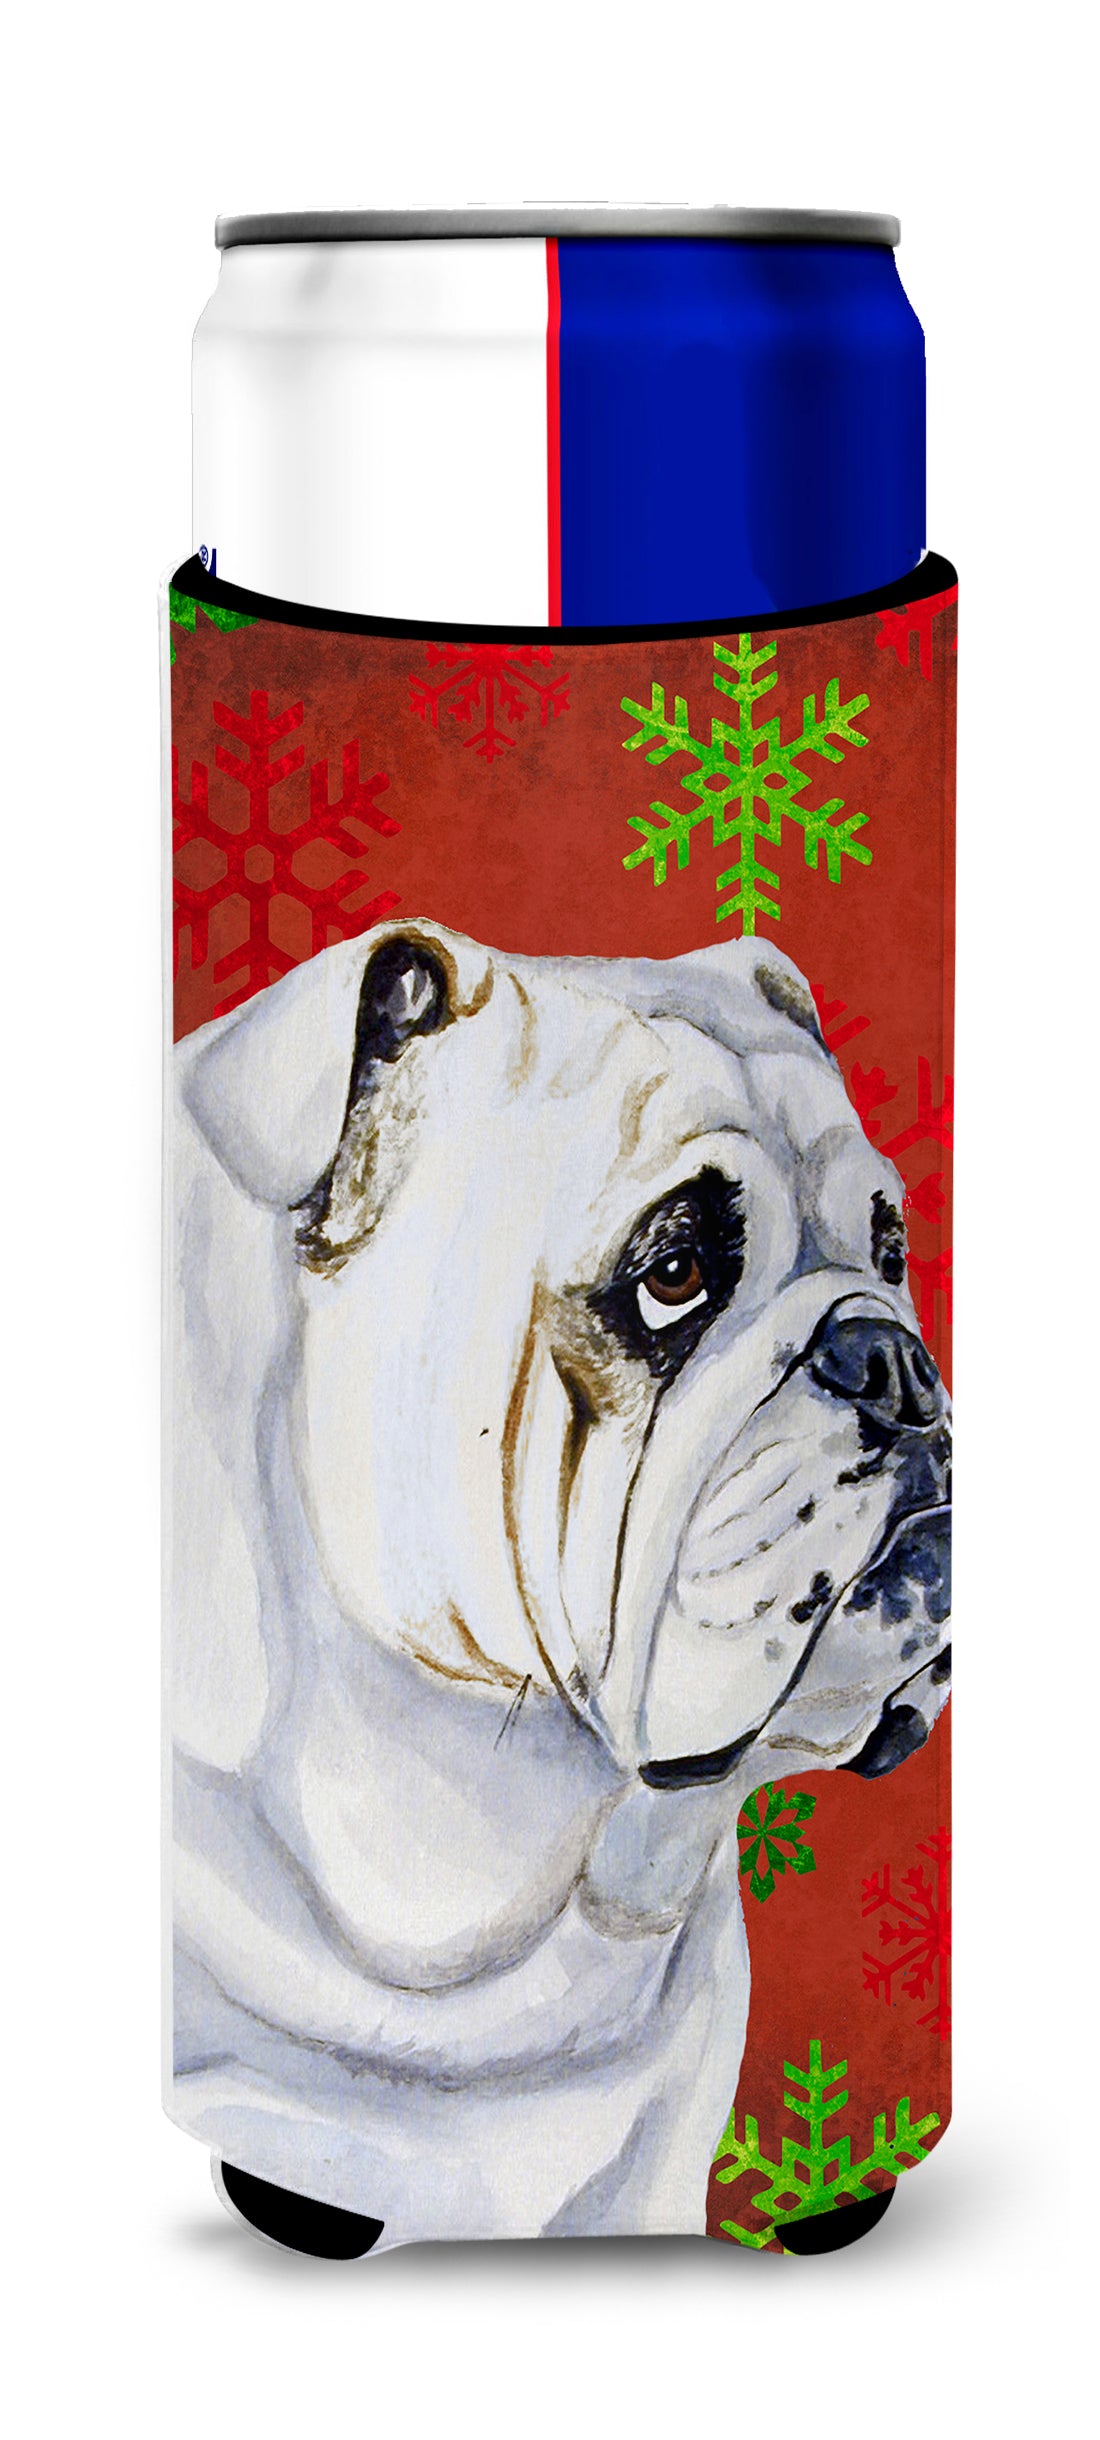 Bulldog English Red and Green Snowflakes Holiday Christmas Ultra Beverage Insulators for slim cans LH9319MUK.